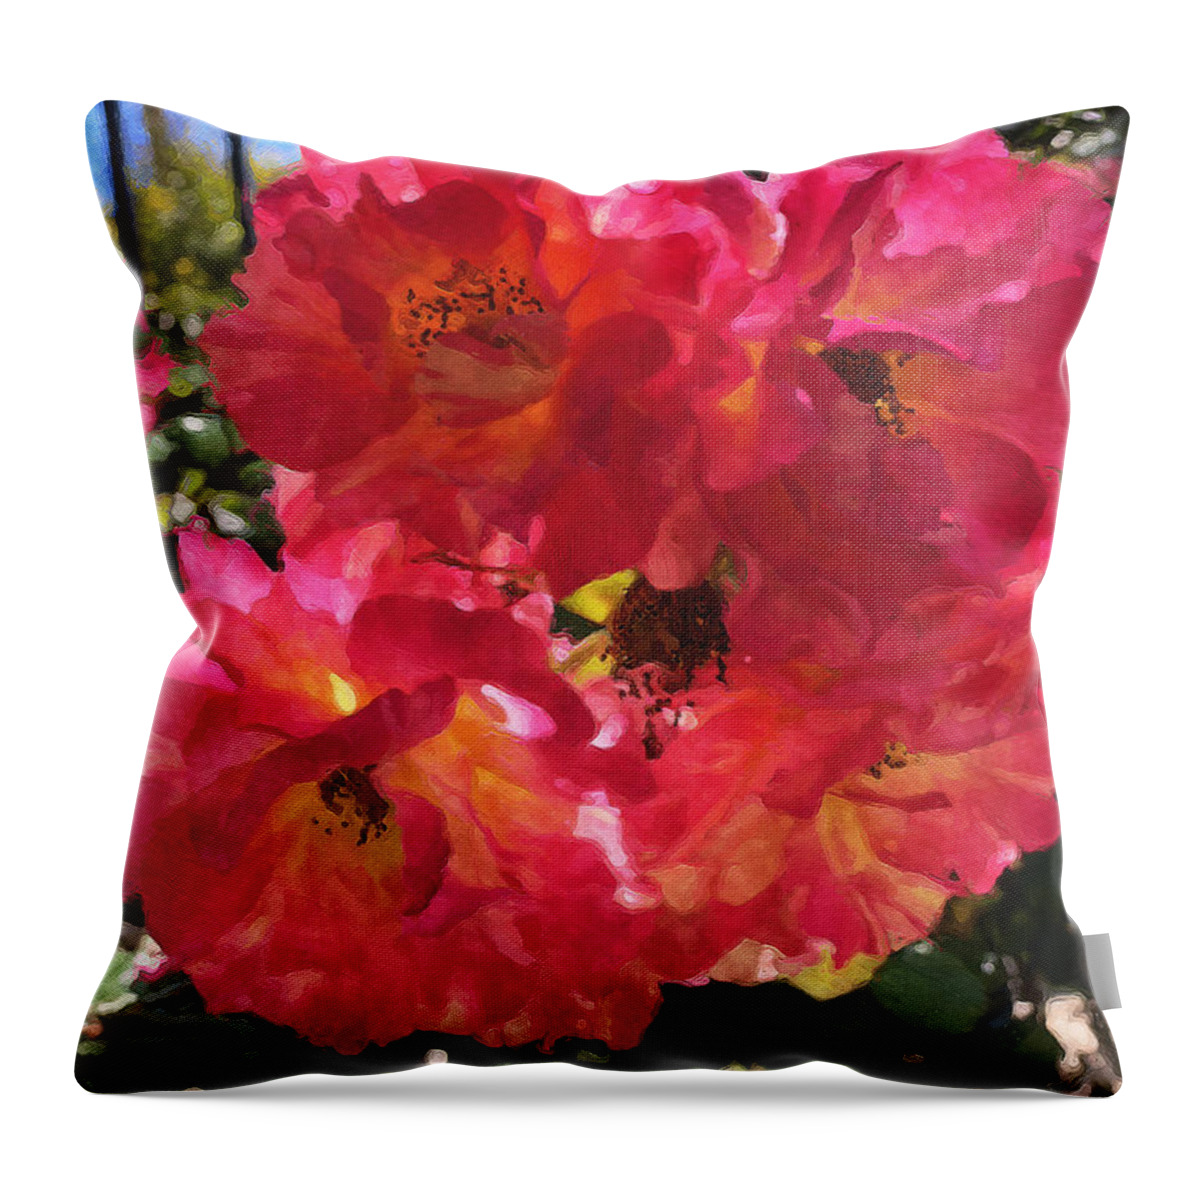 Roses Throw Pillow featuring the photograph Disney Roses One by Brian Watt